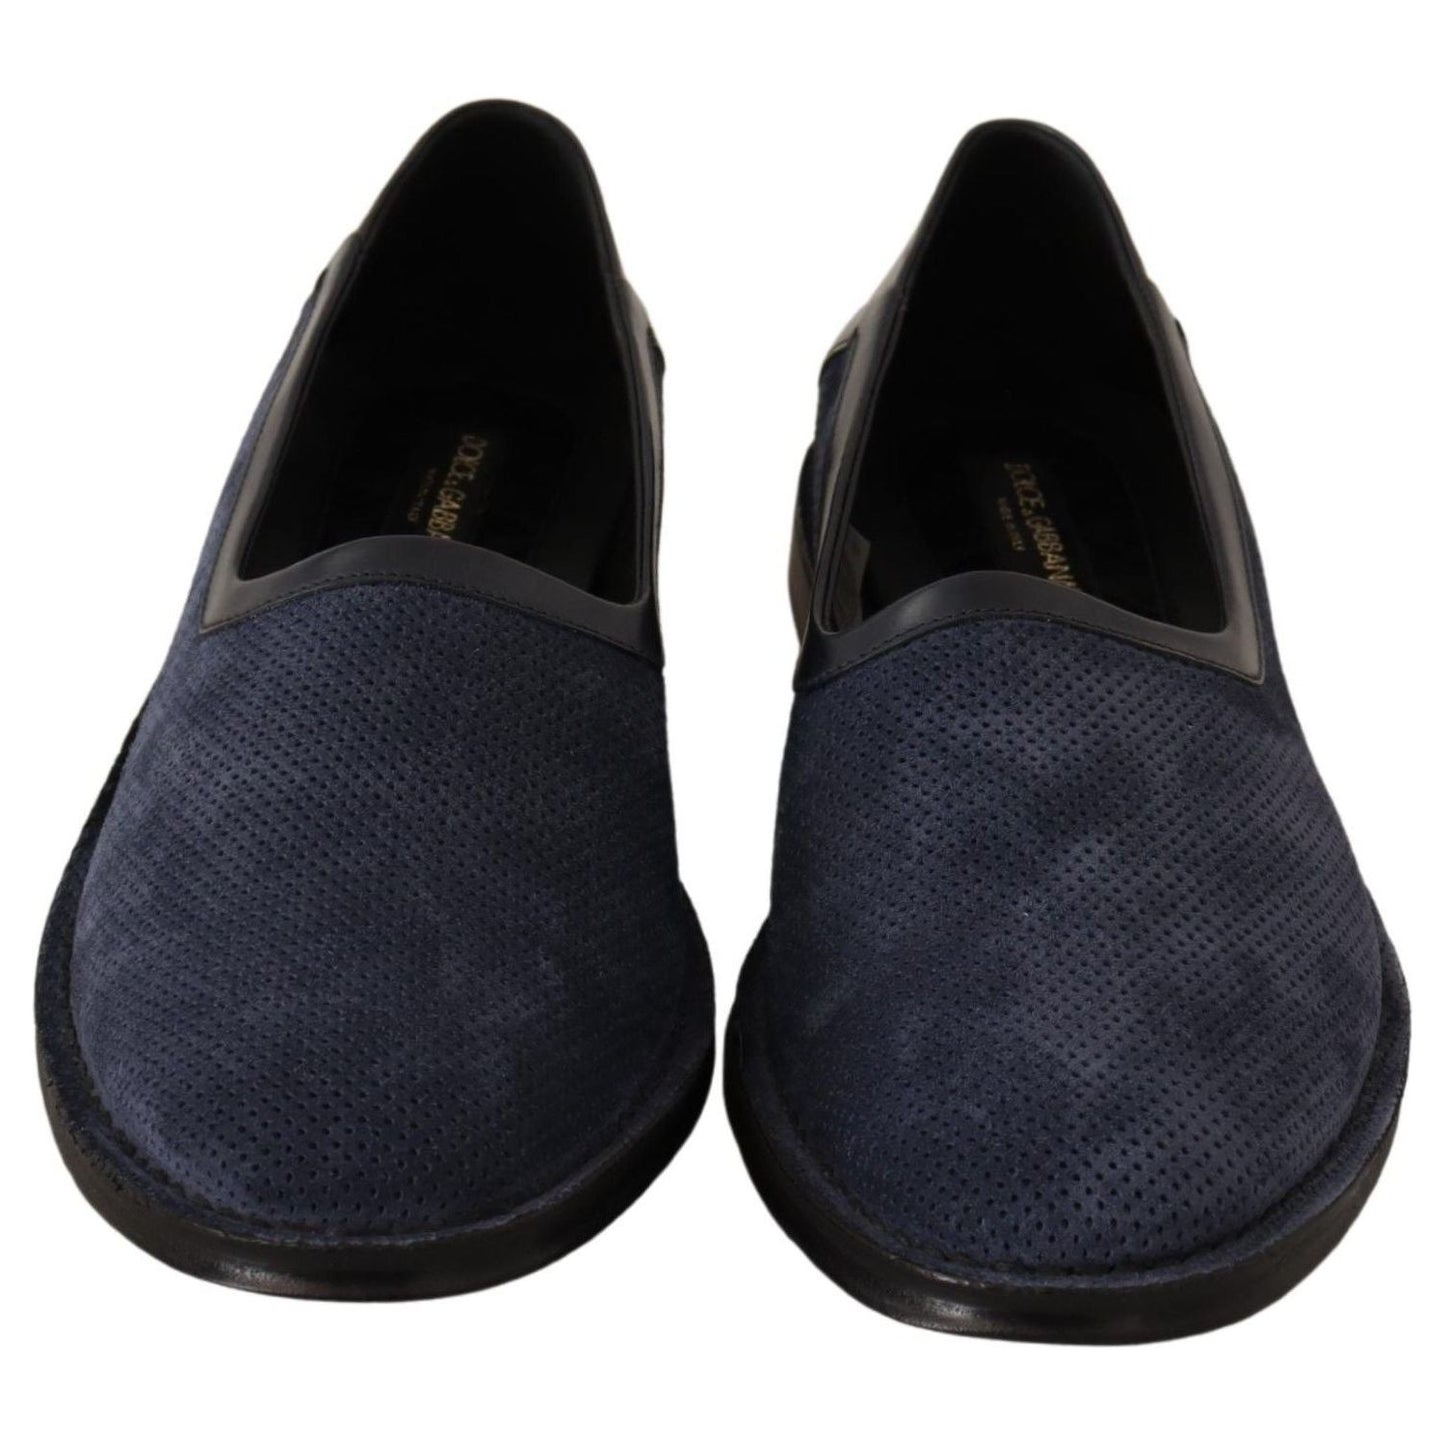 Dolce & Gabbana Elegant Perforated Leather Loafers blue-leather-perforated-slip-on-loafers-shoes MAN LOAFERS